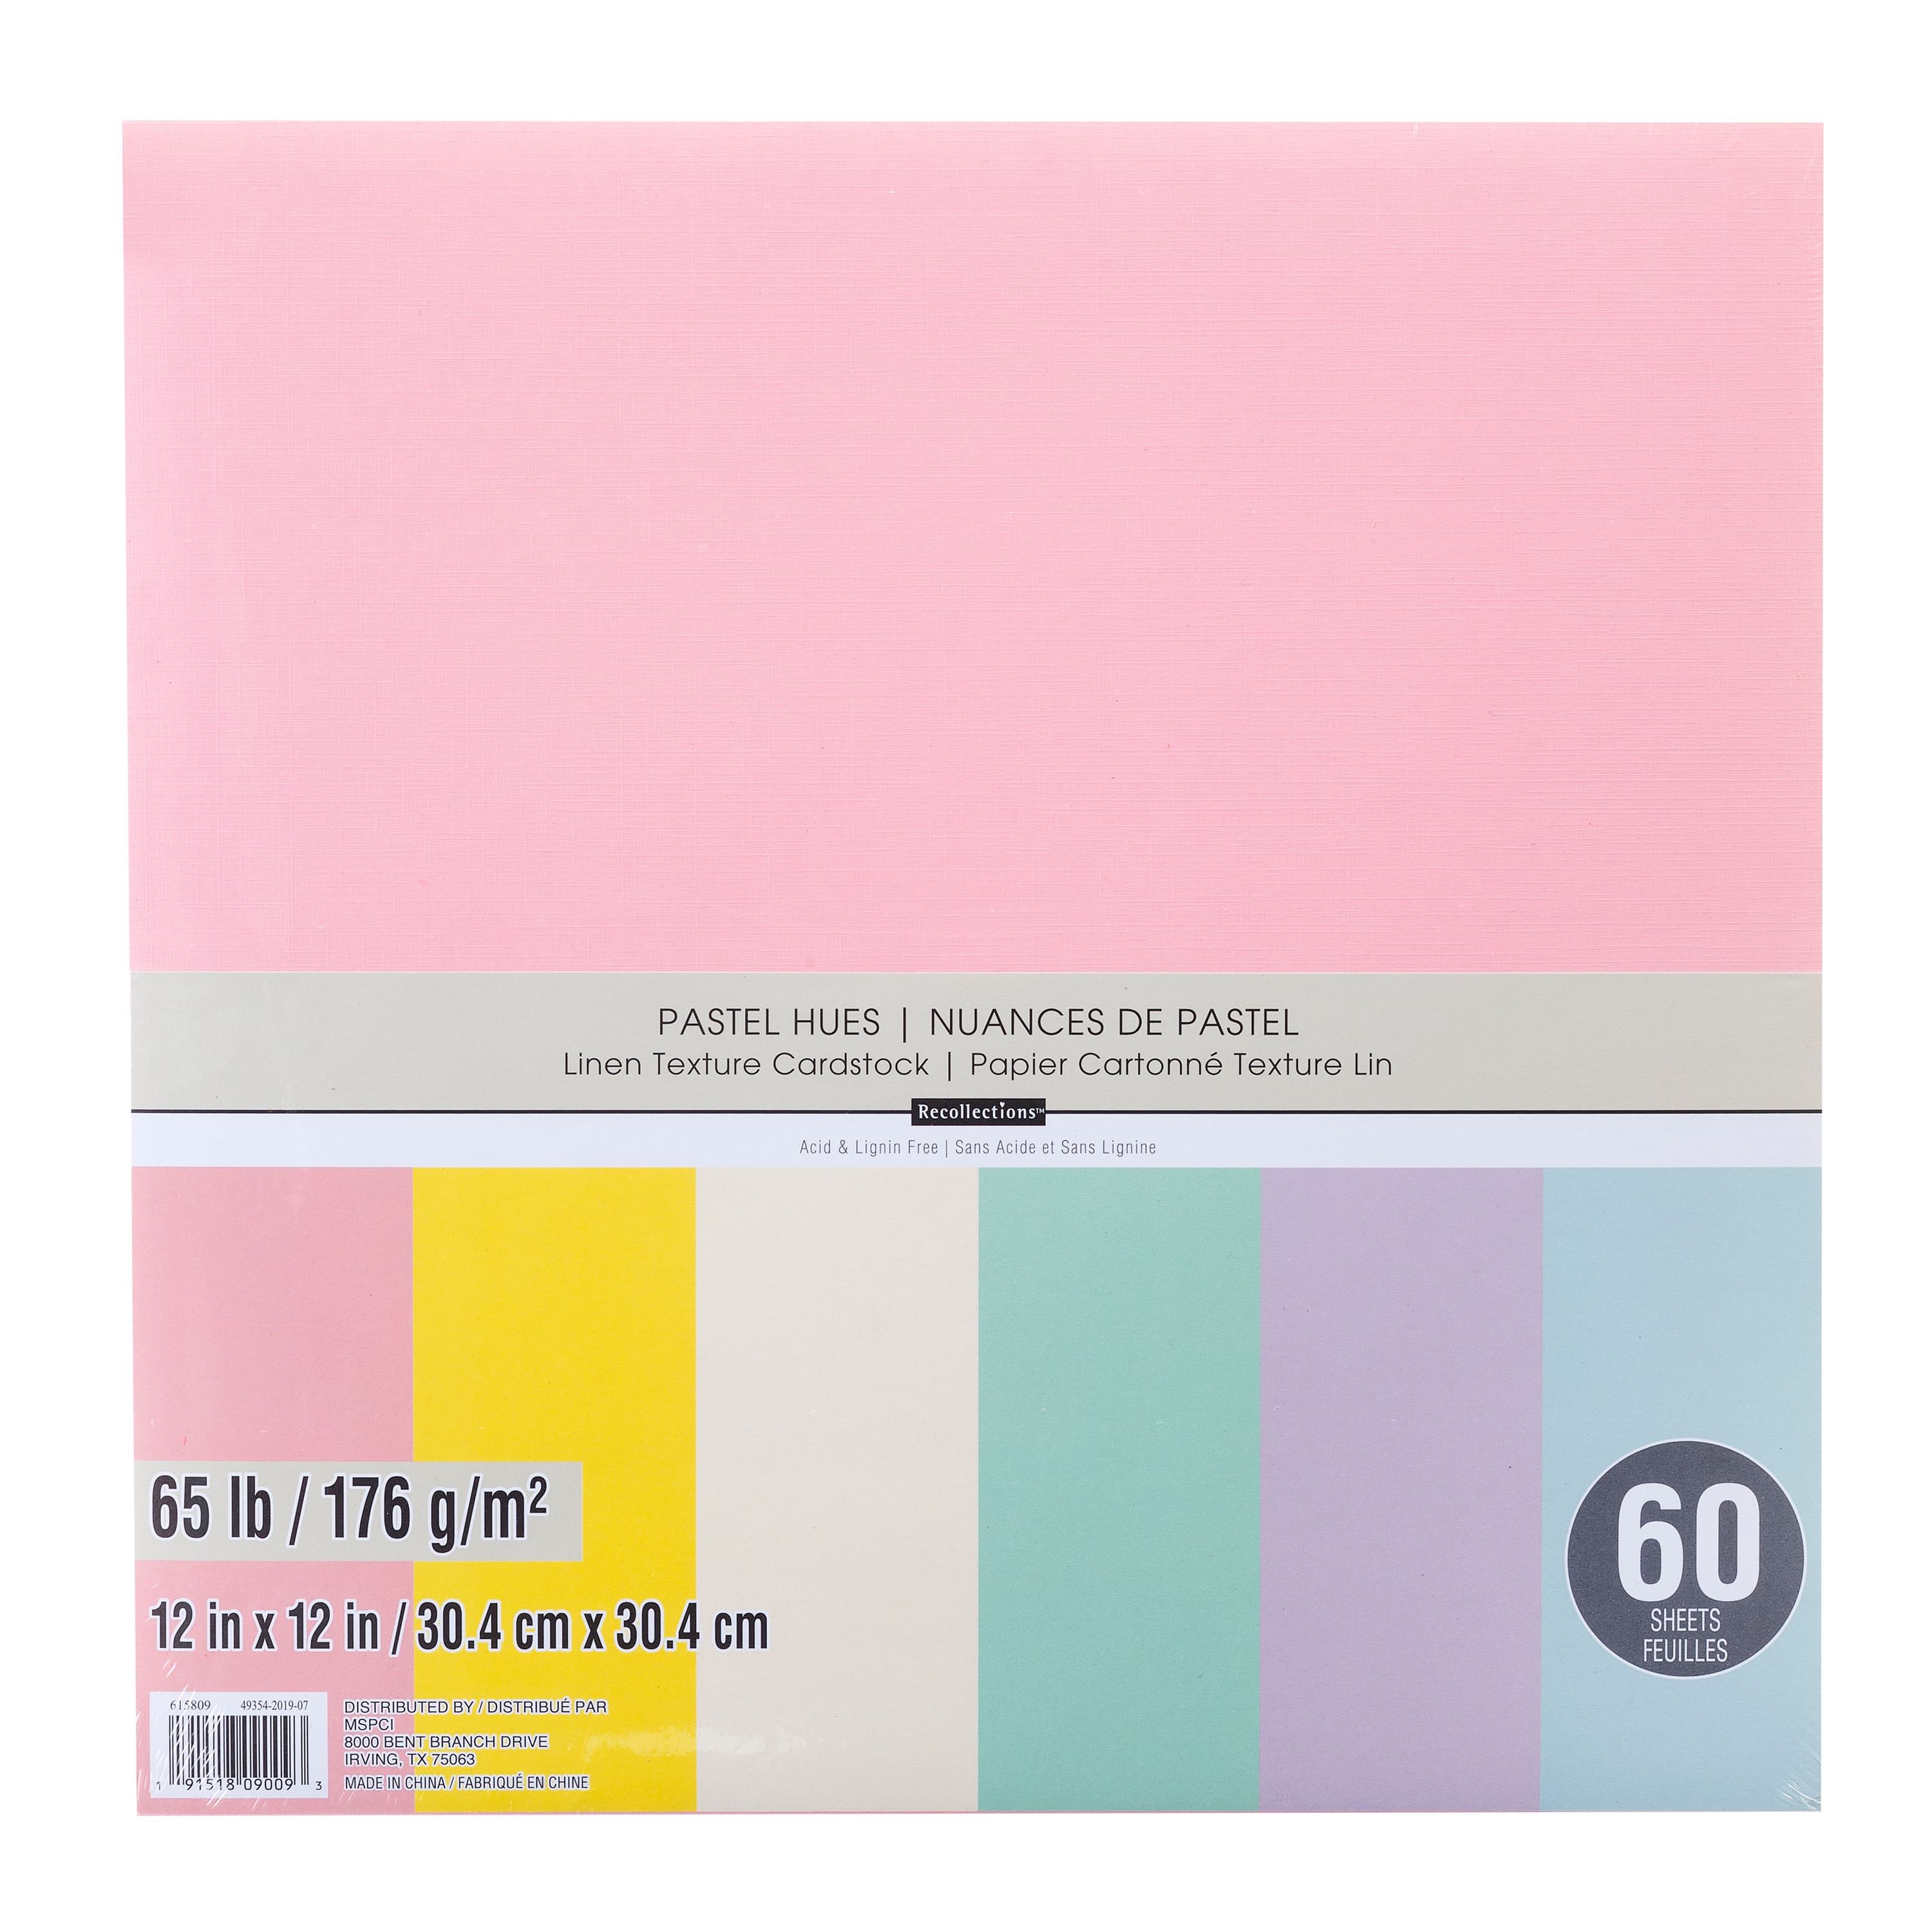 LUX 100 lb. Cardstock Paper 12 x 18 Smoke 500 Sheets/Pack (1218-C-22-500)